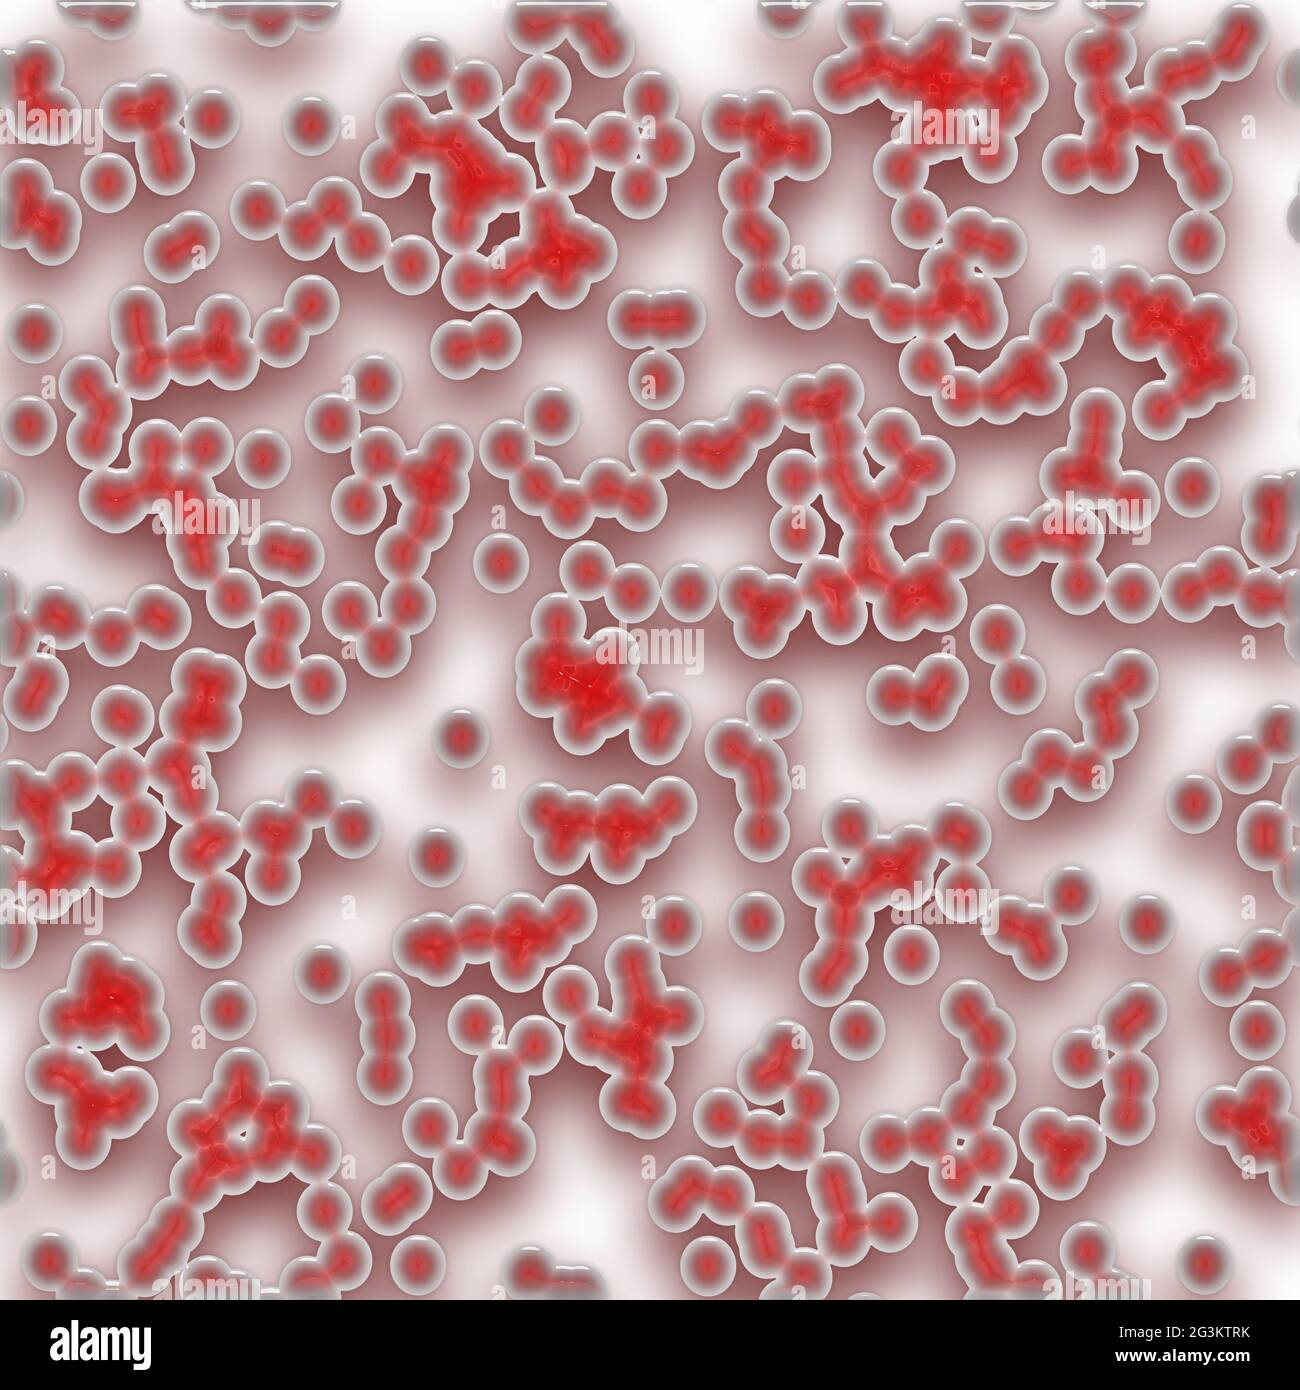 Red blood cells imitation, white background. seamless pattern Stock Photo